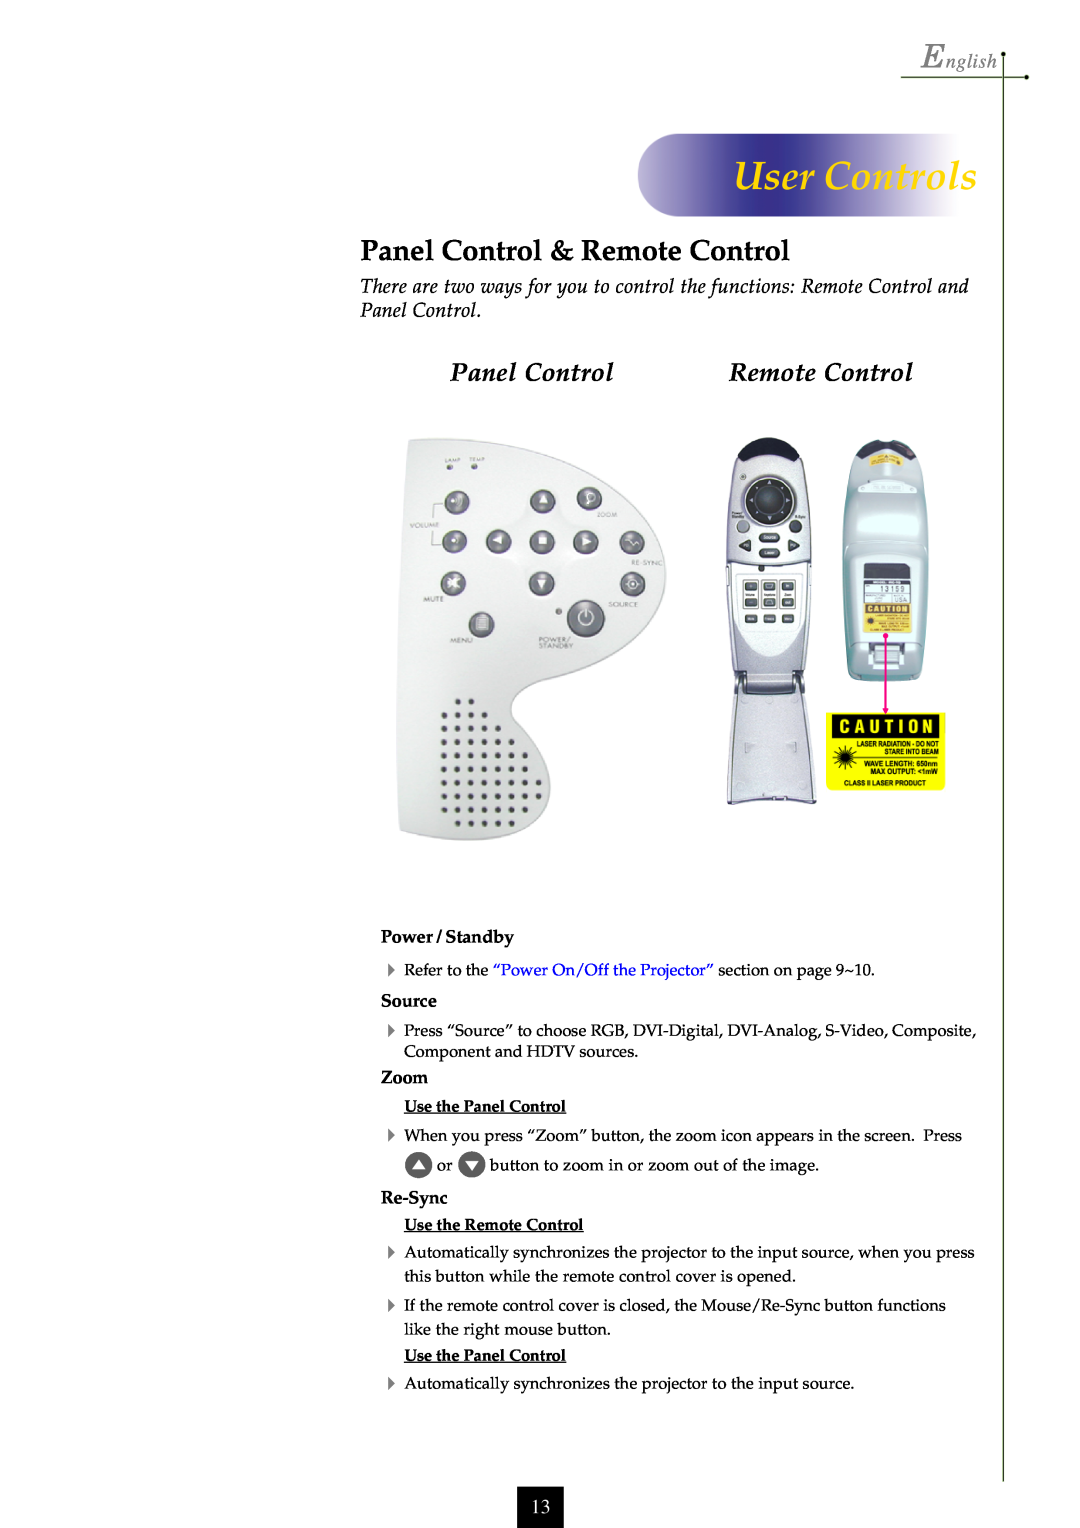 Optoma Technology EP750 specifications User Controls, Panel Control & Remote Control, English, Use the Panel Control 